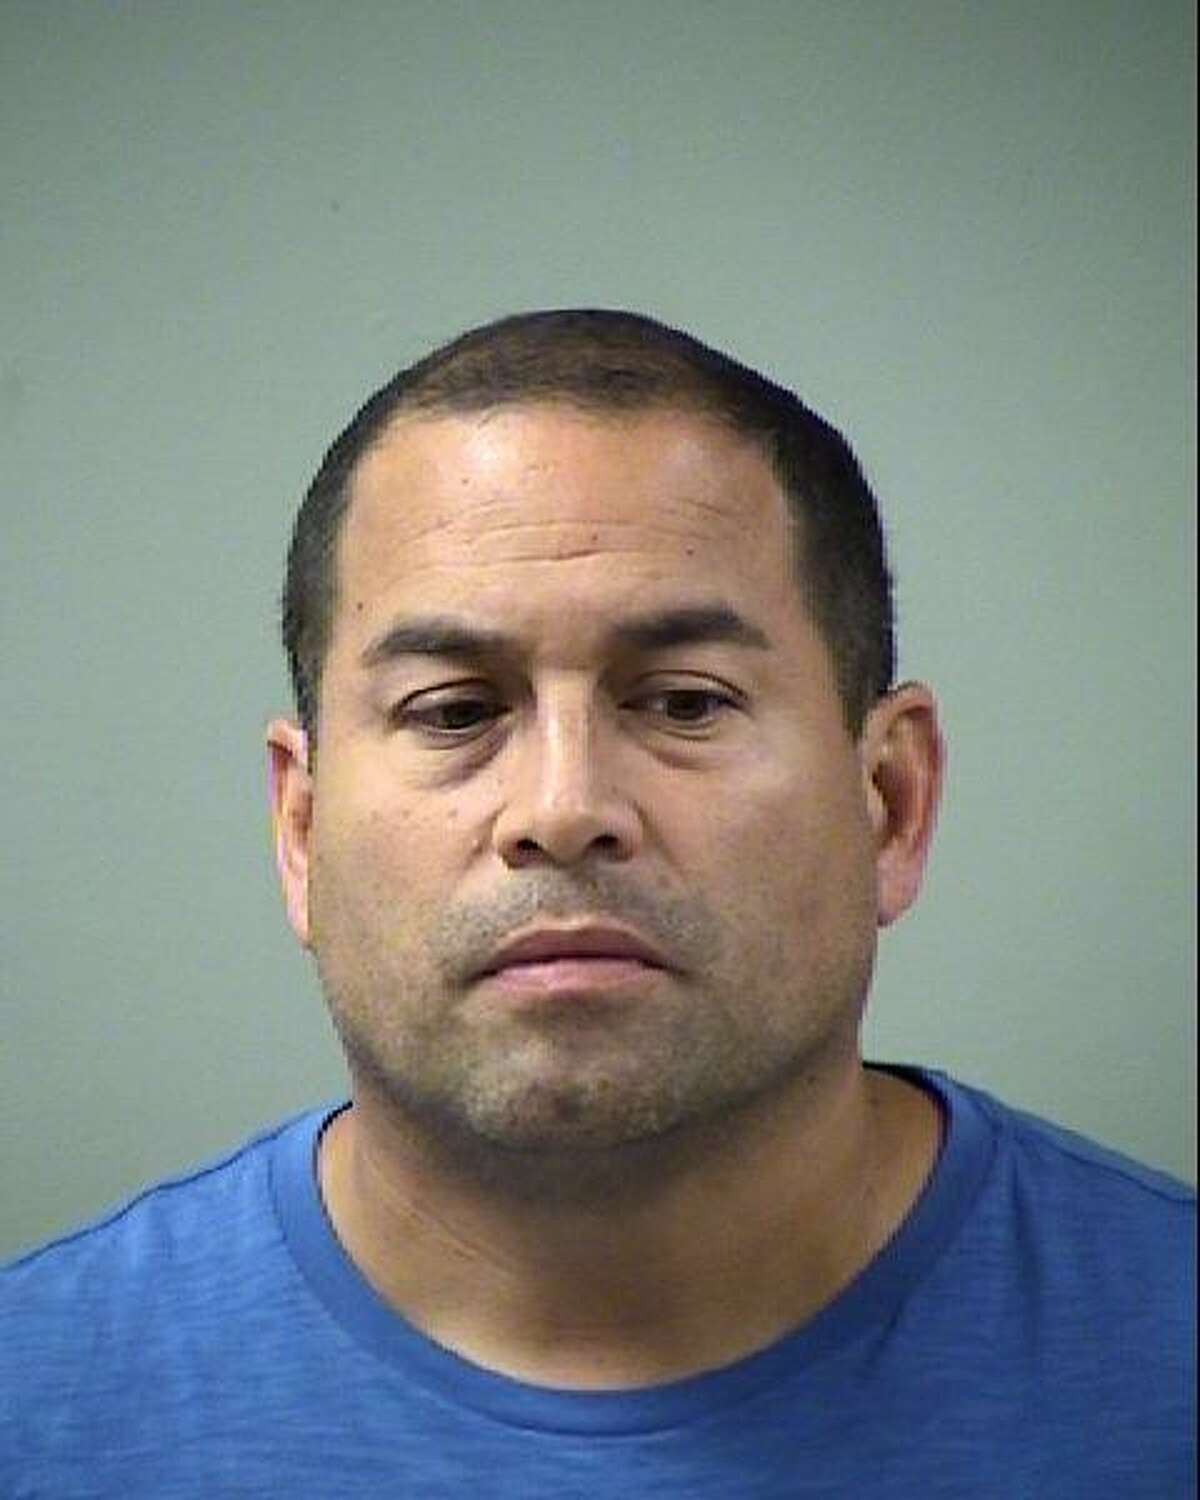 Detective Xavier Cordero, 48, received a three-day suspension in March for a domestic disturbance in which he allegedly slapped his wife. Cordero was also charged with assault causing bodily injury, a class A misdemeanor, but the criminal charges were dropped in December after Cordero’s wife refused to press charges.